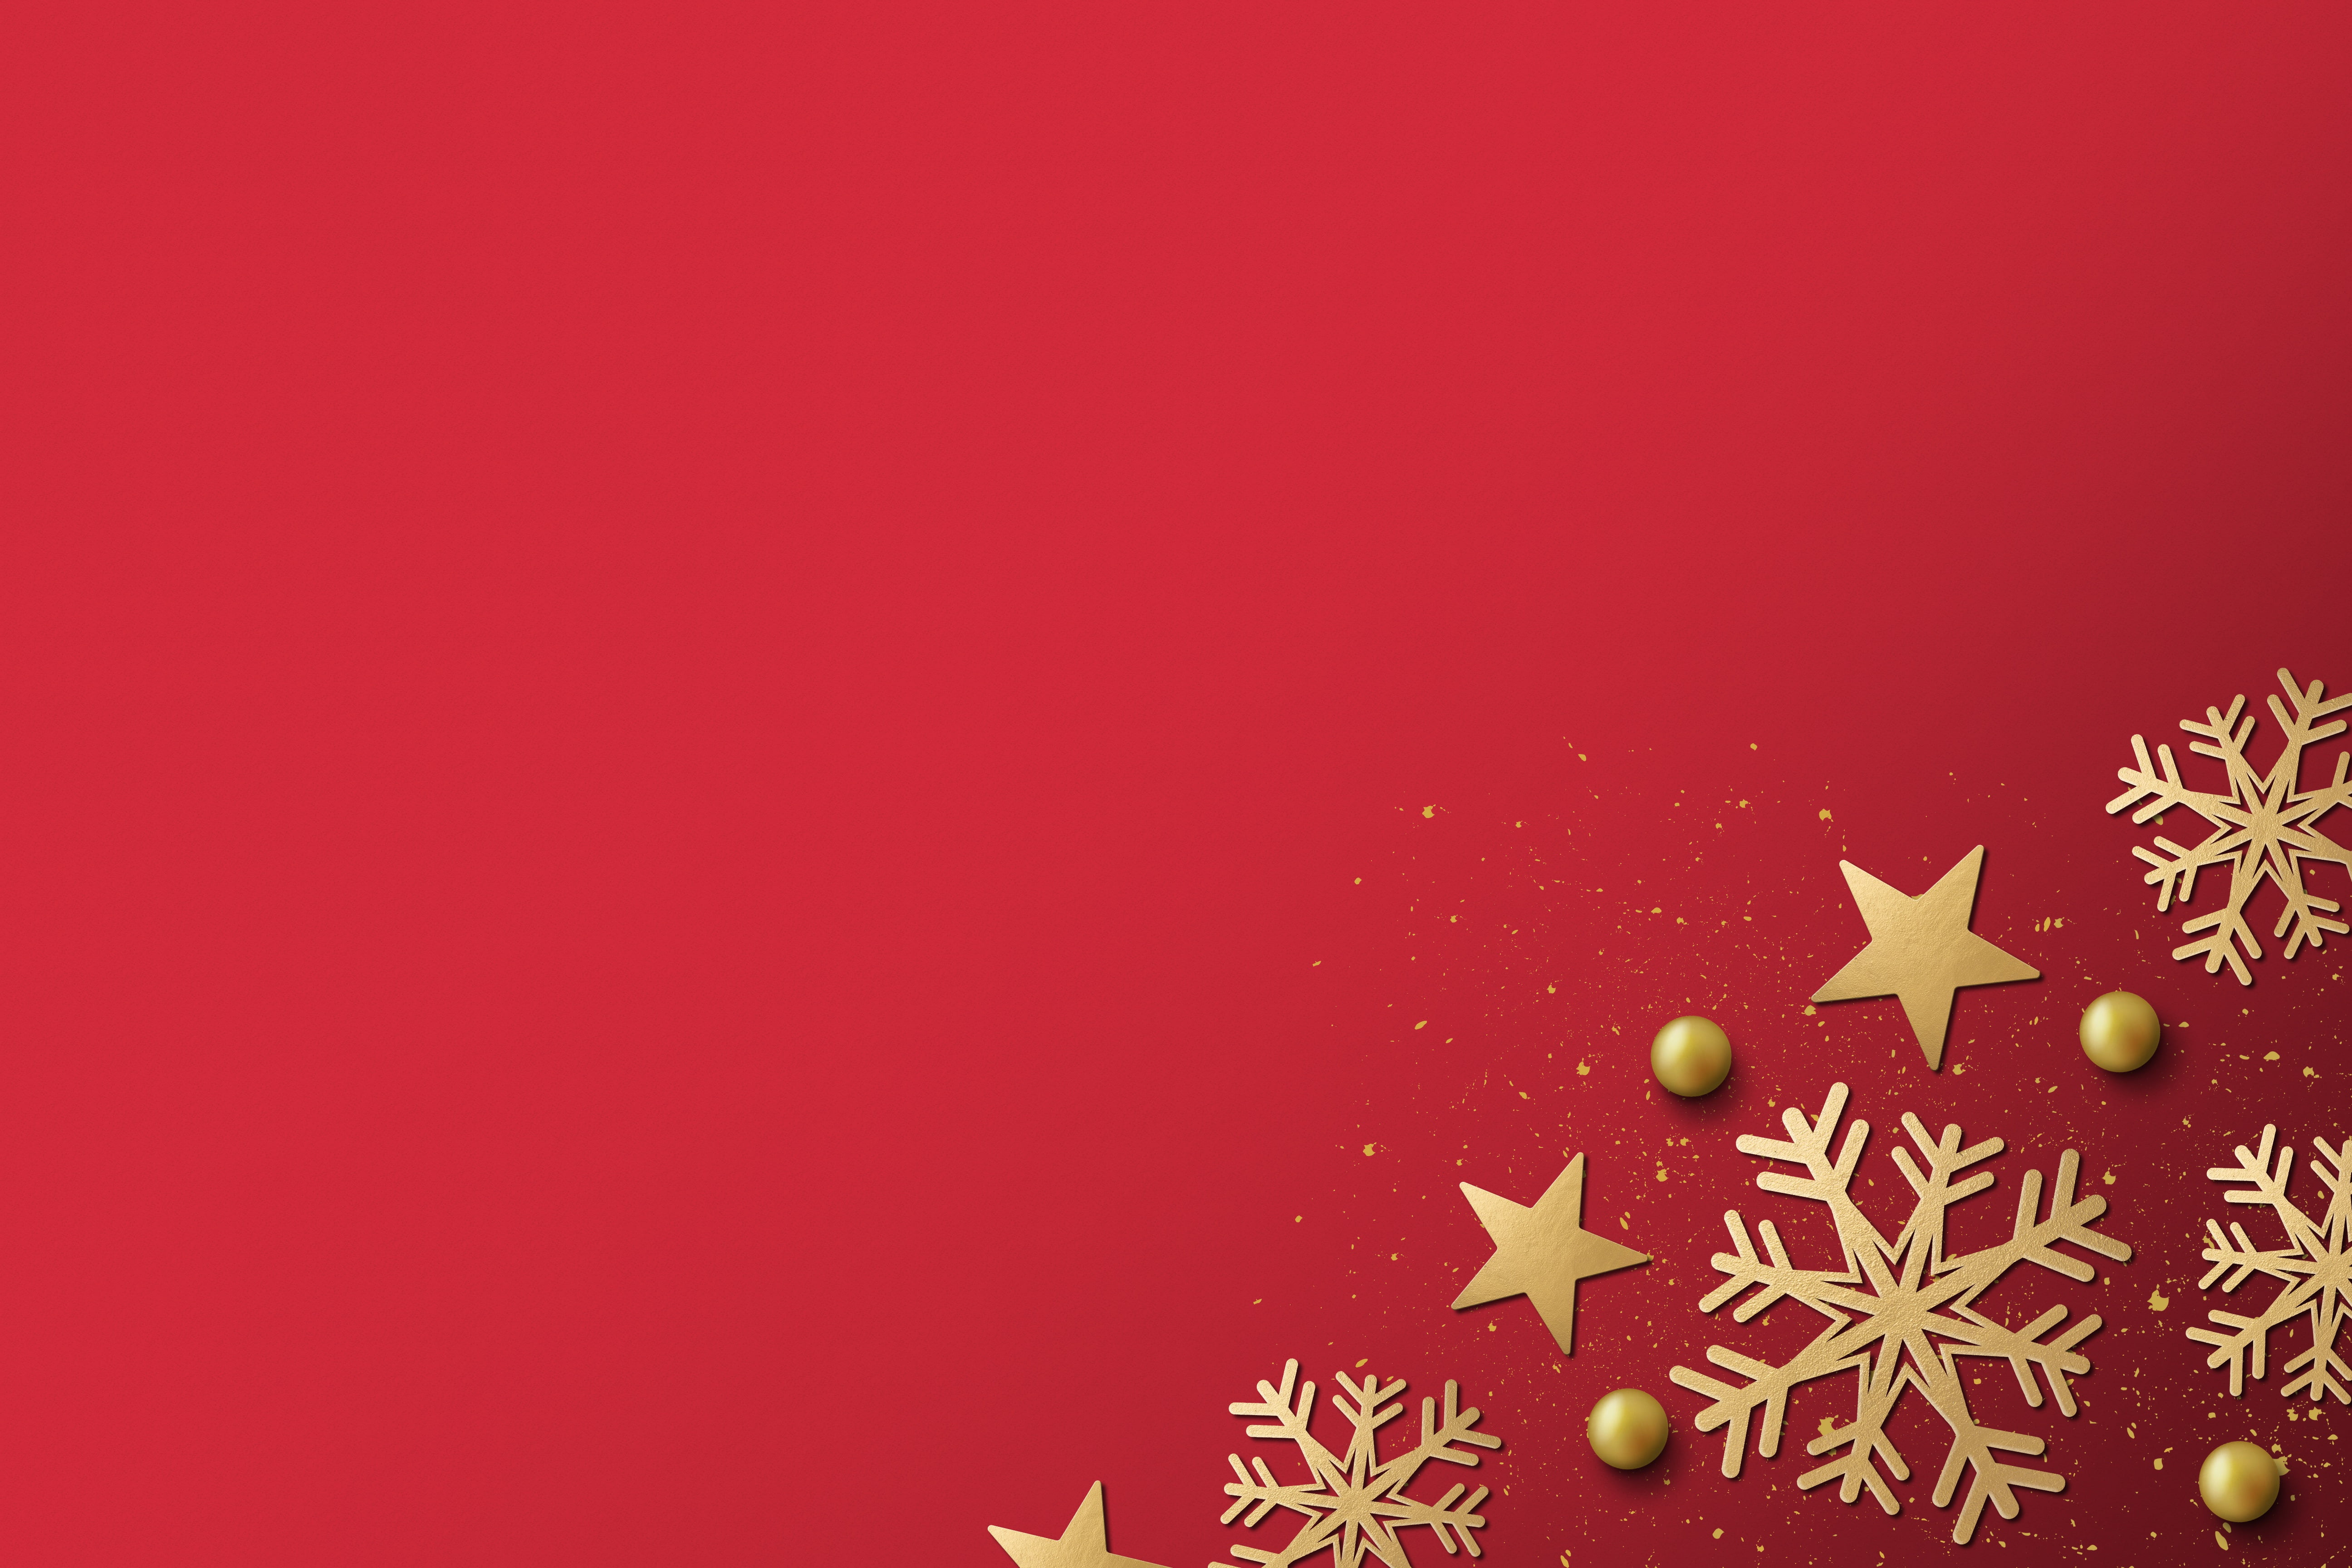 winter, snowflakes, red, background, golden, black, Christmas